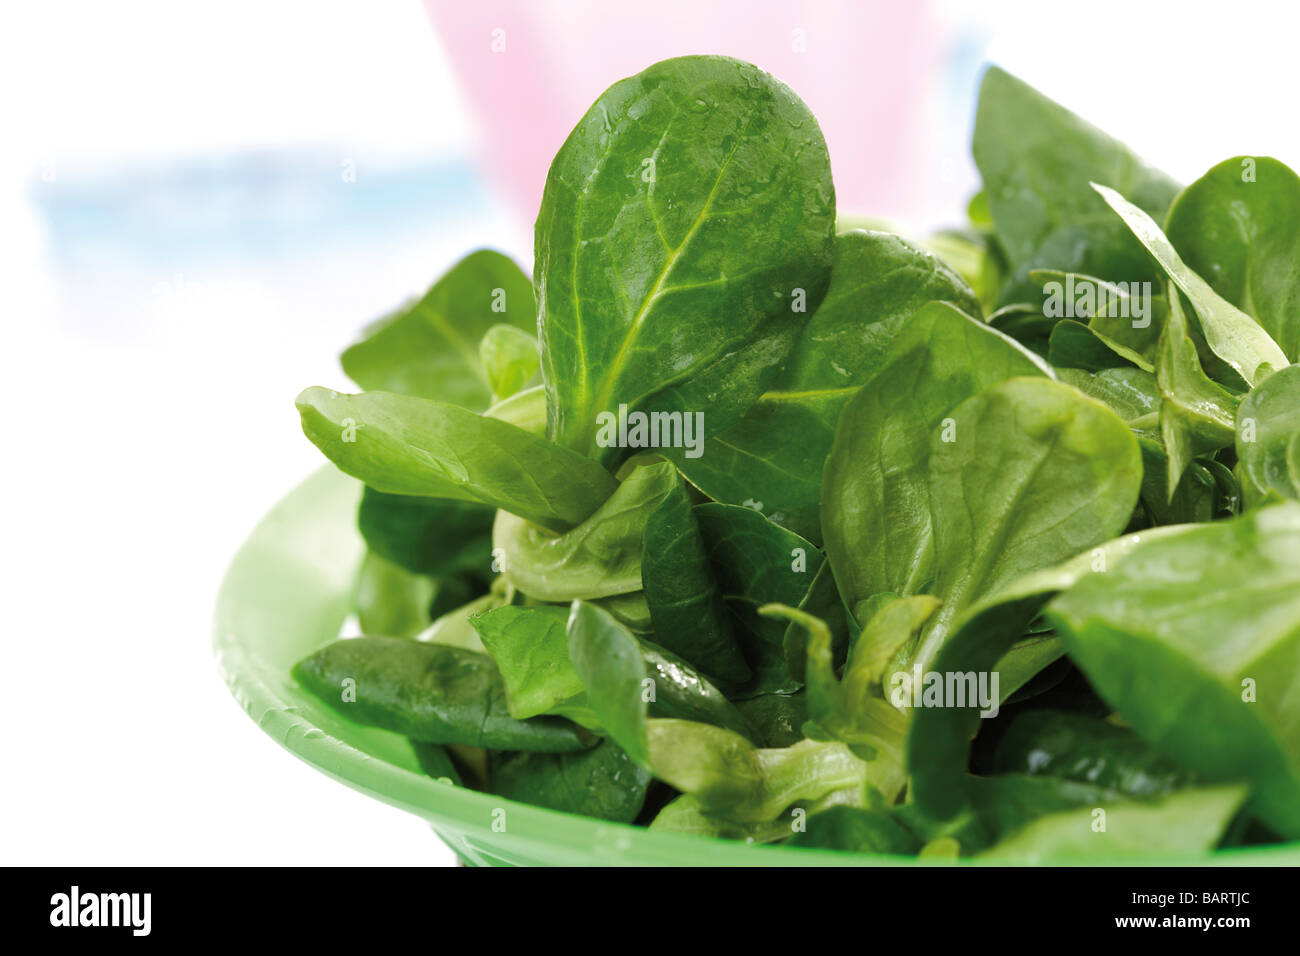 Field salad in plastic bowl, close-up Stock Photo